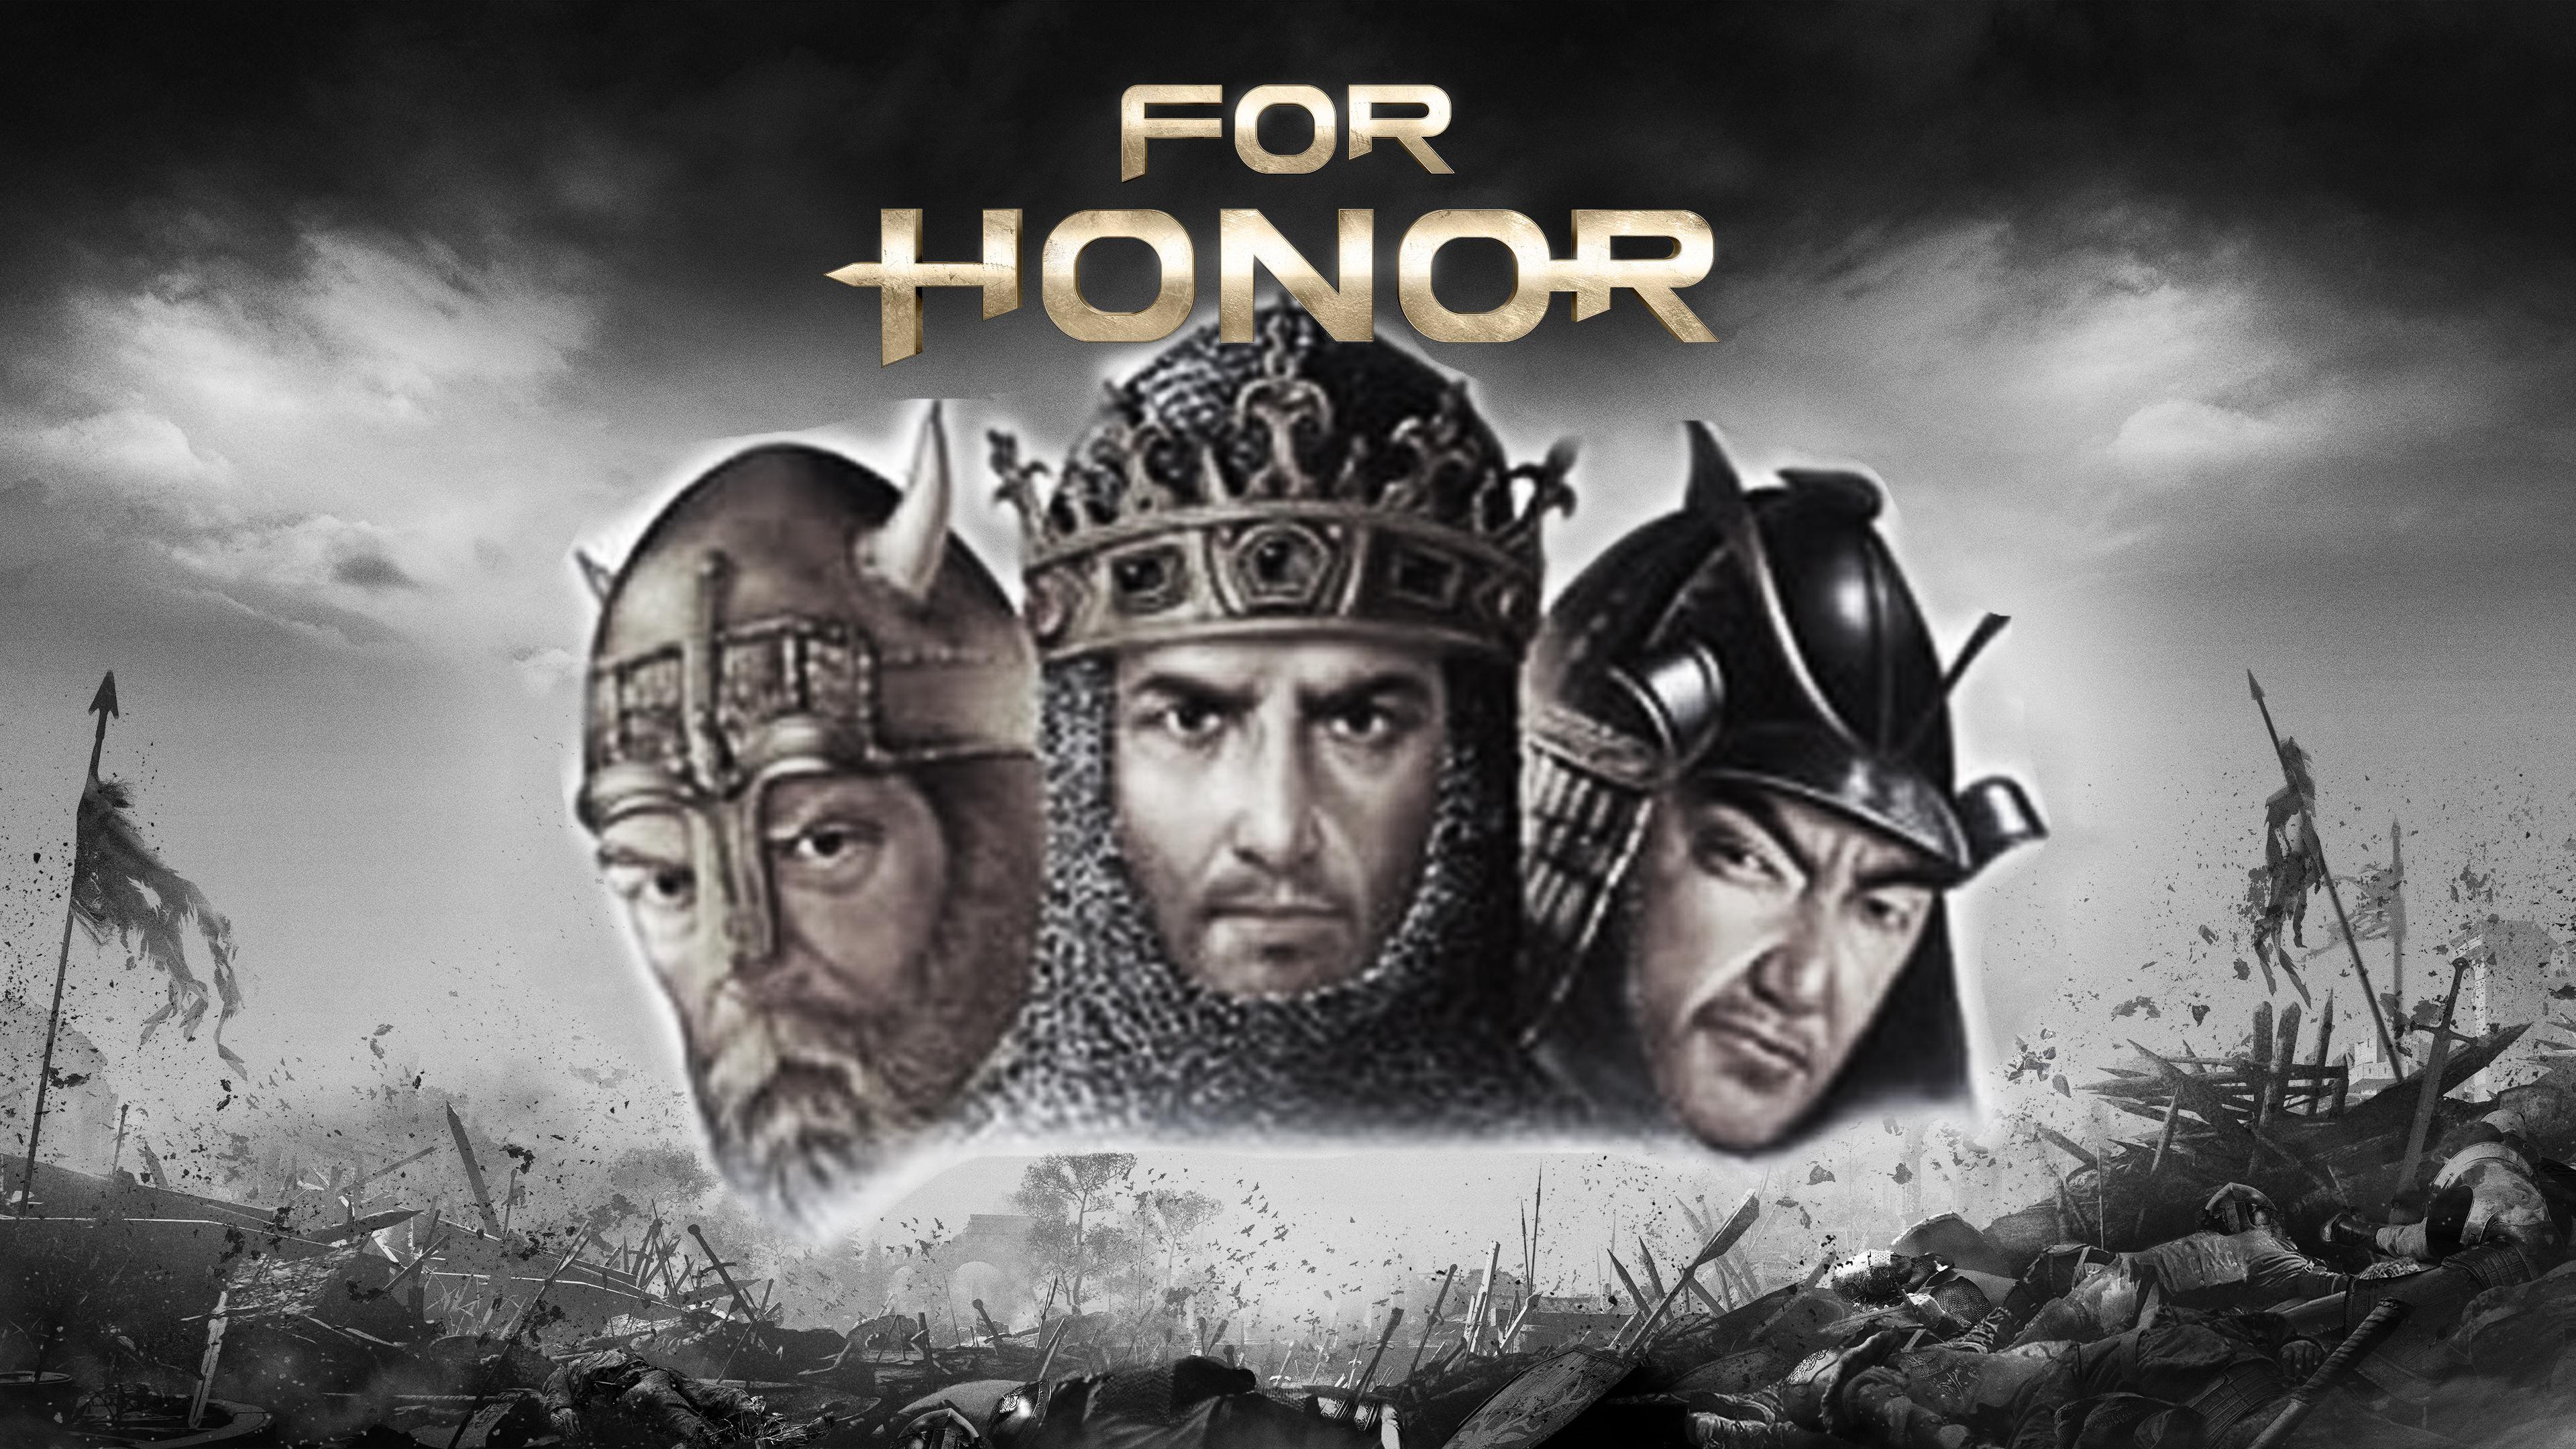 for honor wallpaper,font,movie,album cover,photography,poster